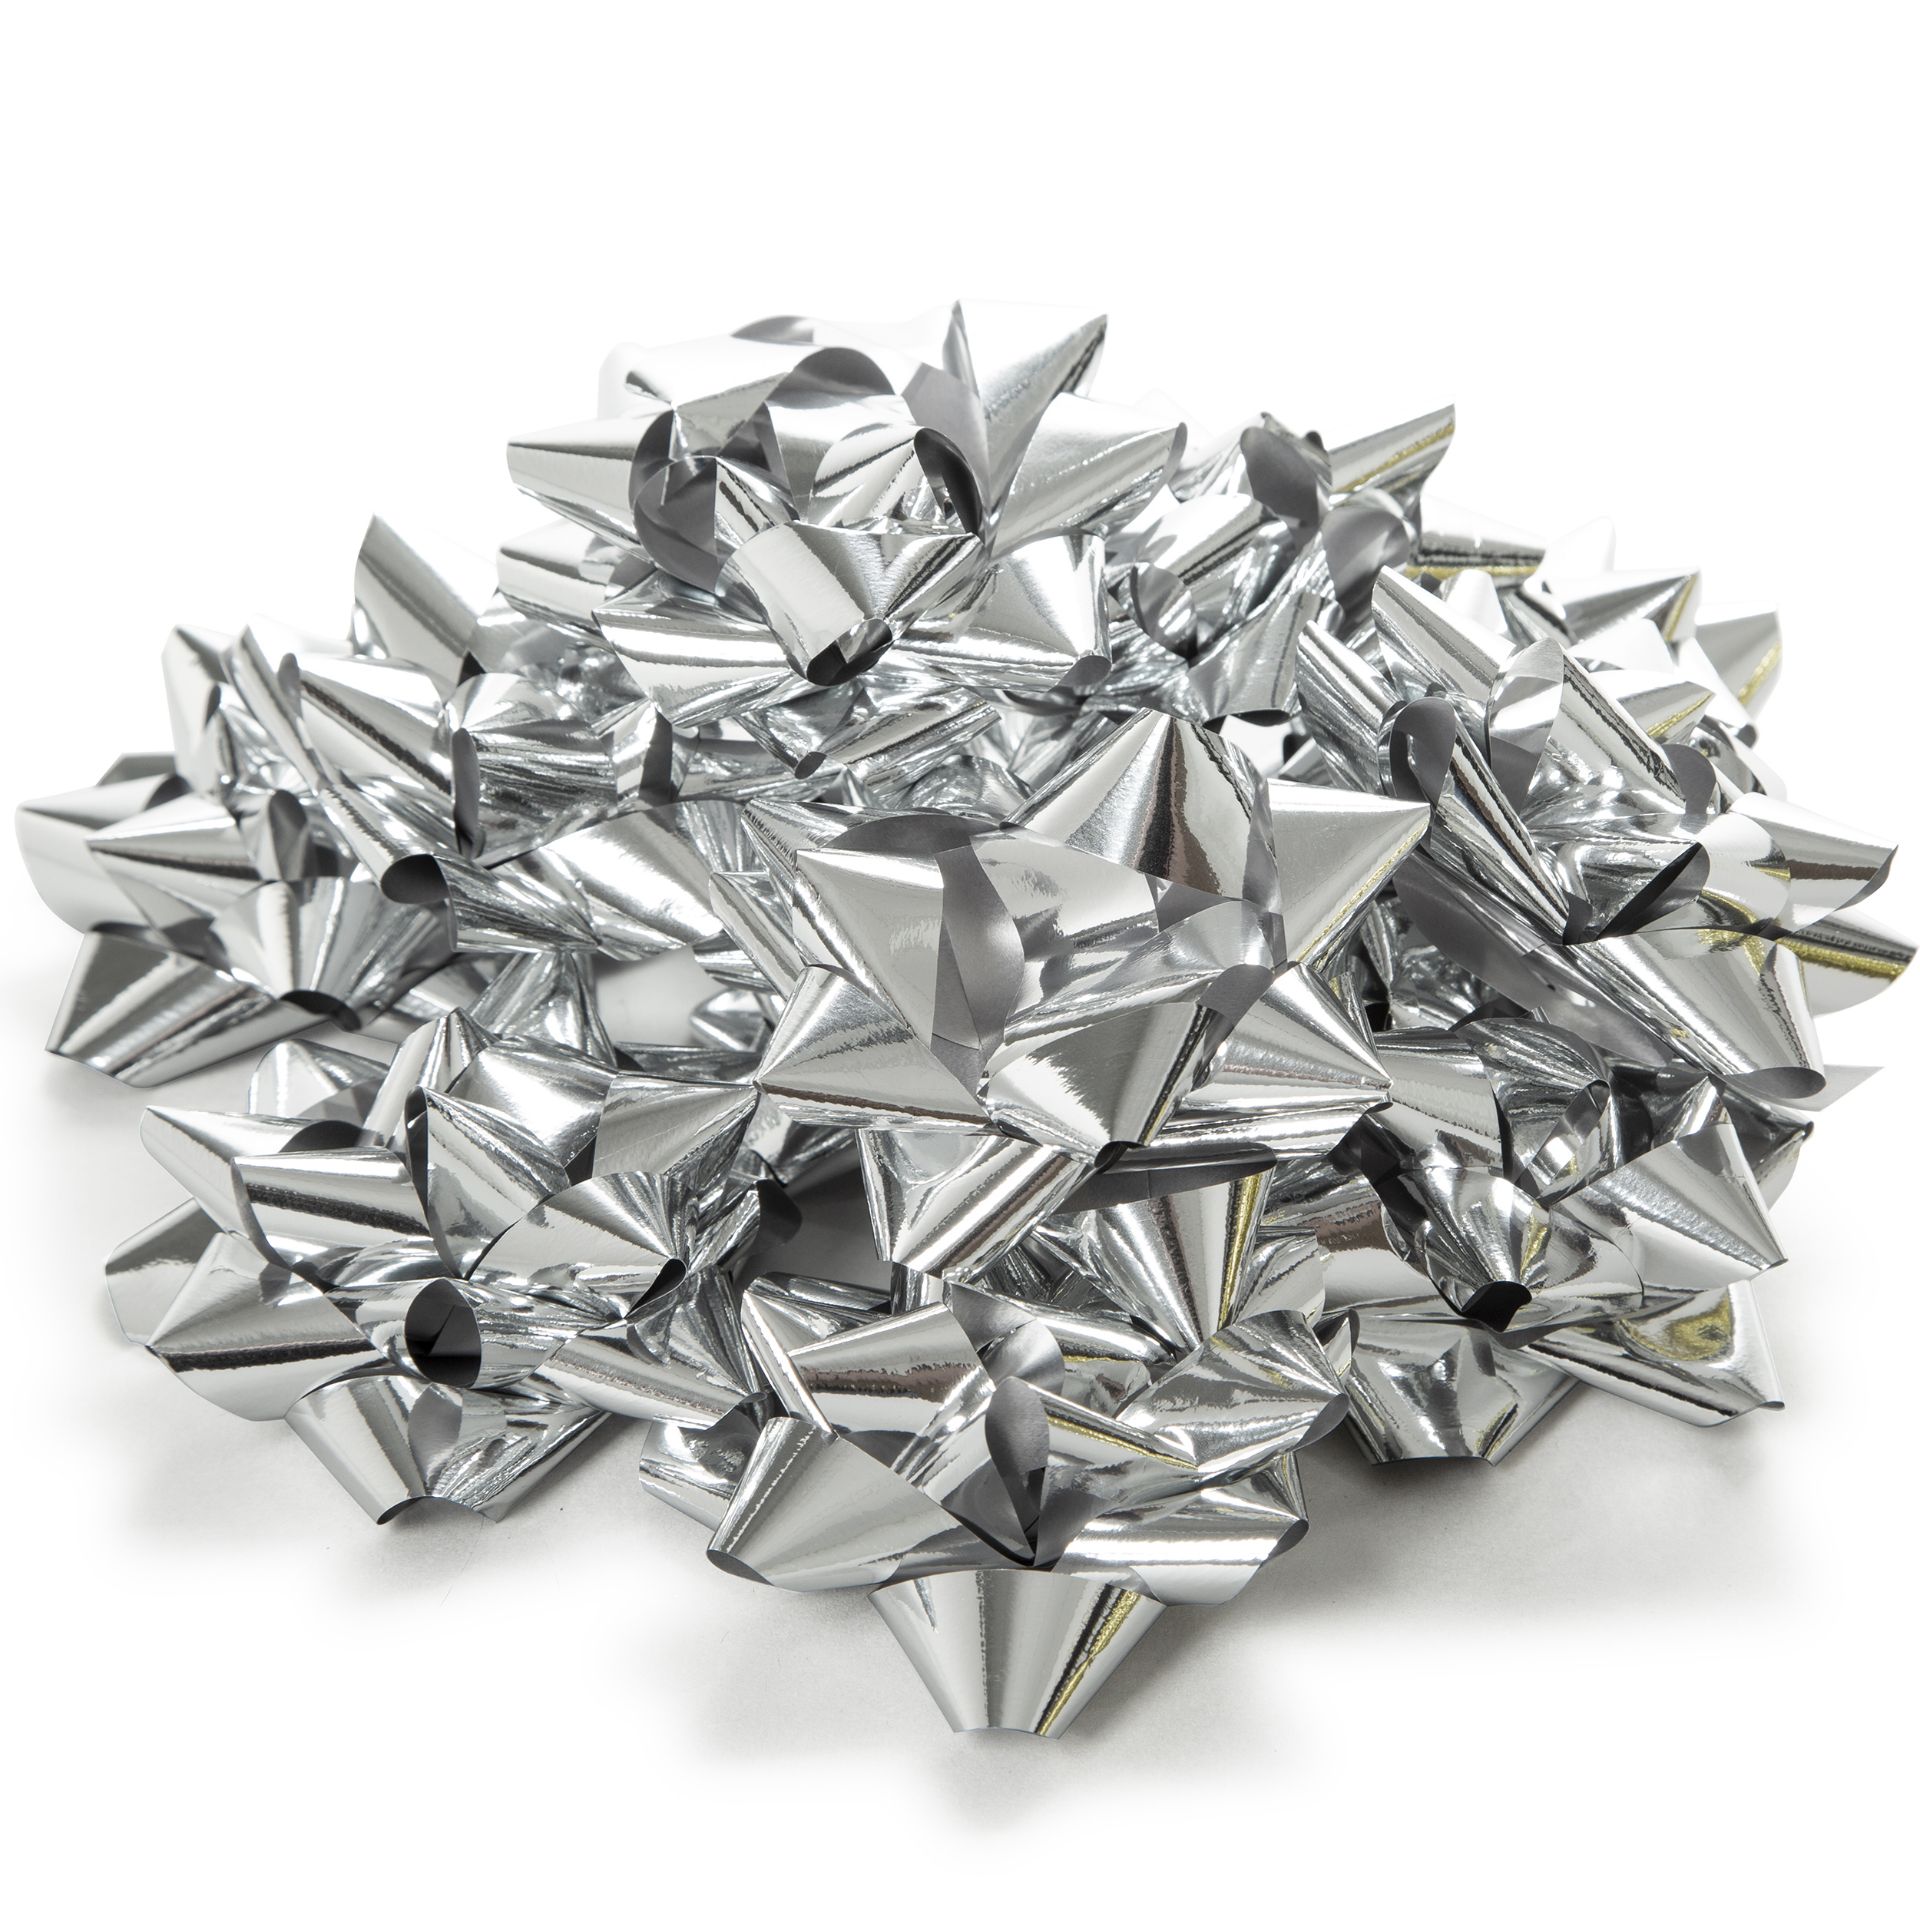 144 X LARGE SILVER XMAS BOWS FOR PRESENTS AND GIFTS - 24 BOWS IN EACH BAG - Image 6 of 9